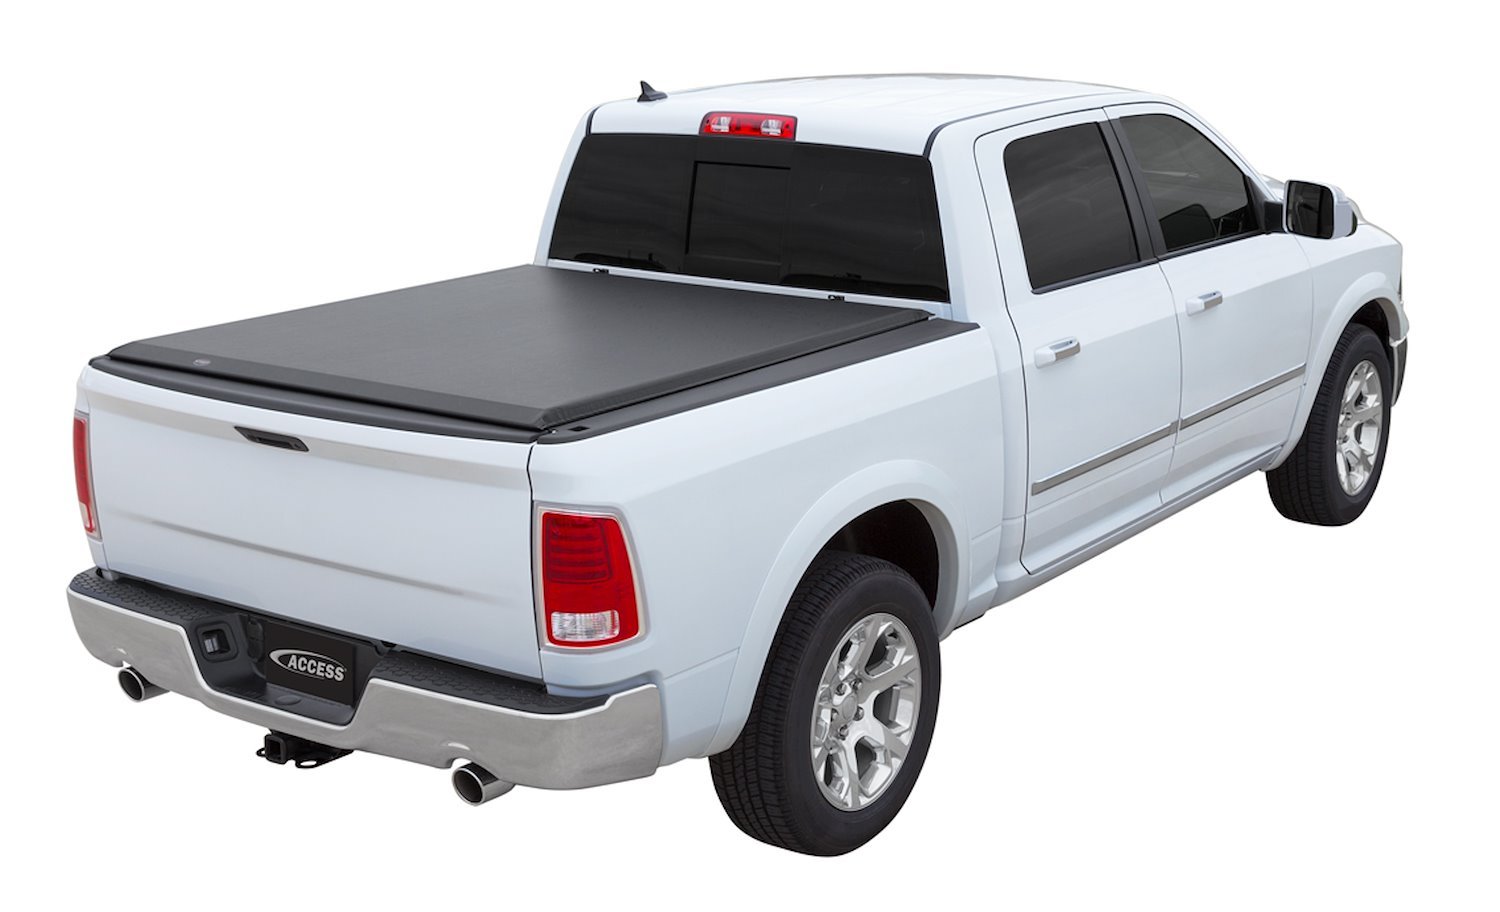 Original Roll-Up Tonneau Cover, 2009-2018 Ram 1500, Fits Select Ram Classic, 2010-2018 Ram 2500/3500, with 8 ft. Bed